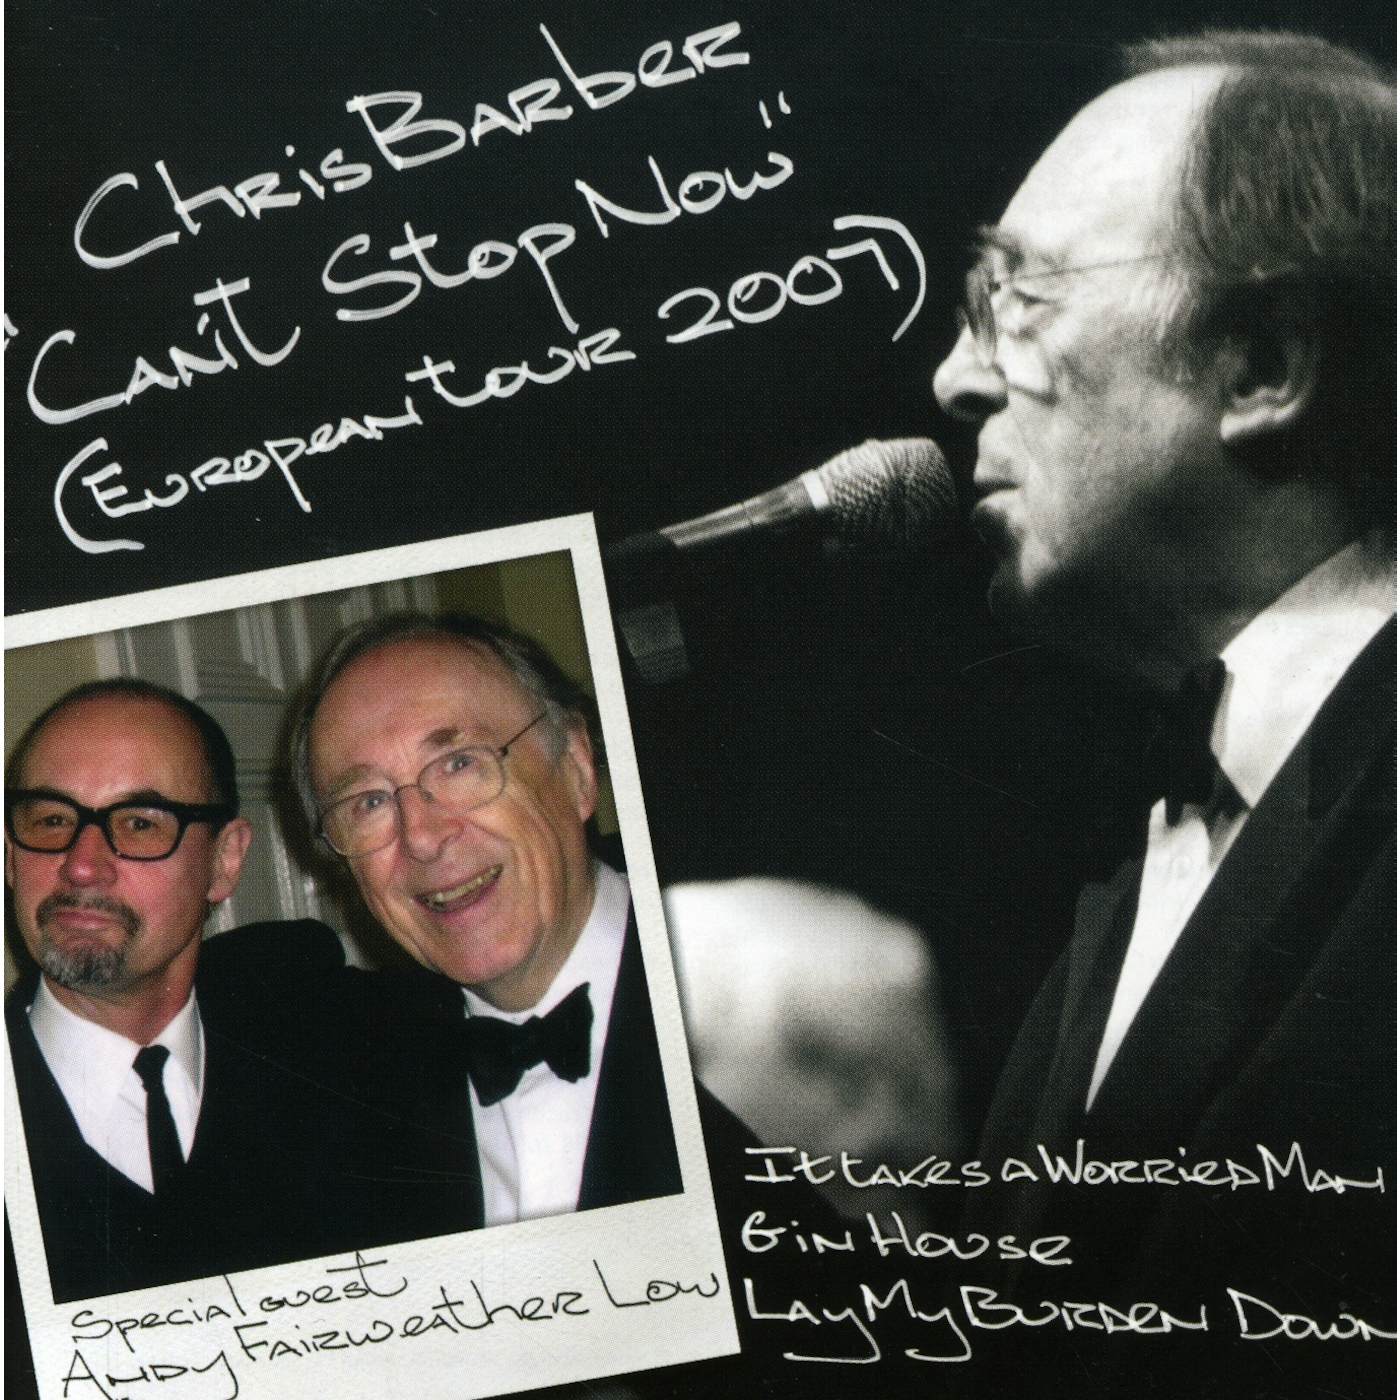 Chris Barber CAN'T STOP NOW CD